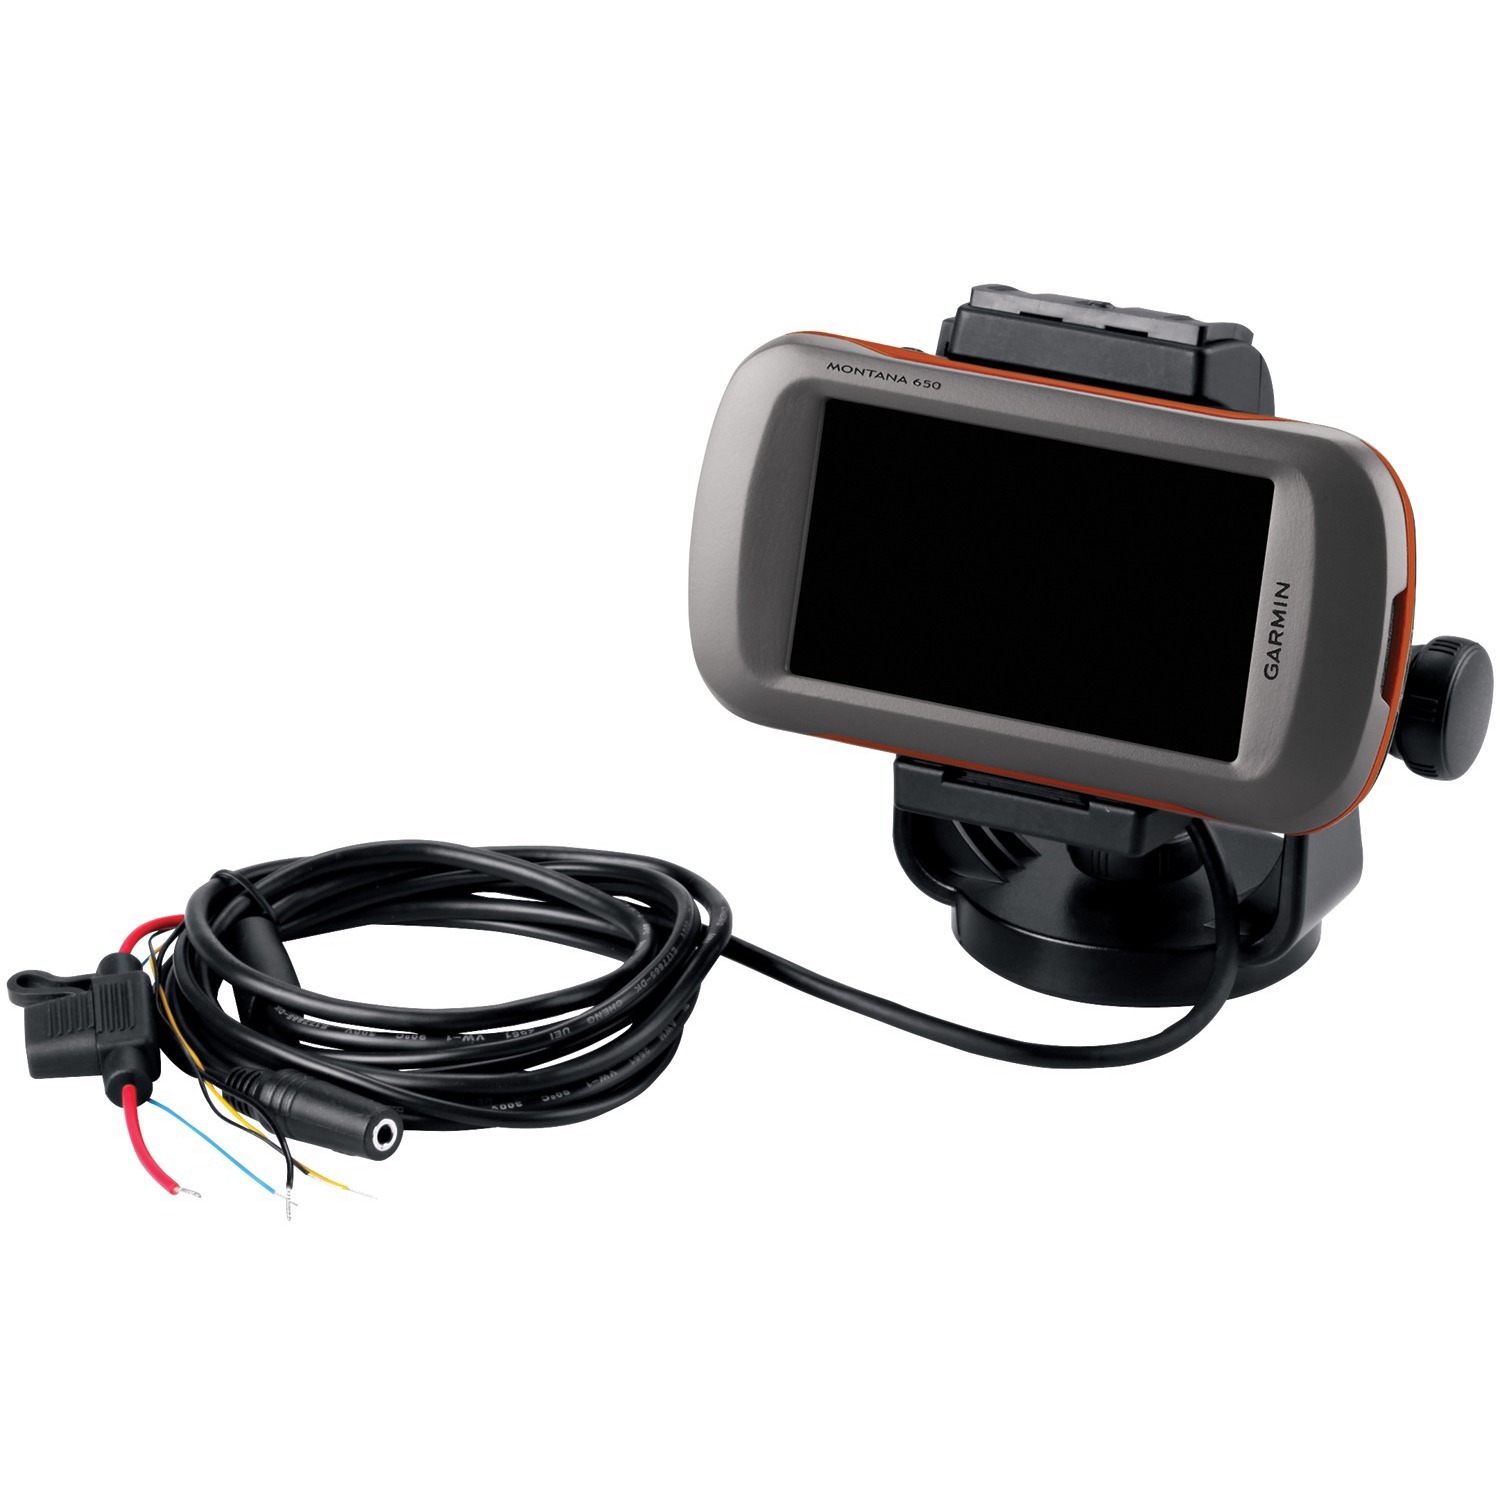 Garmin 010-11654-06 Marine Mount with Power Cable, for Montana Series Handheld GPS - image 2 of 2